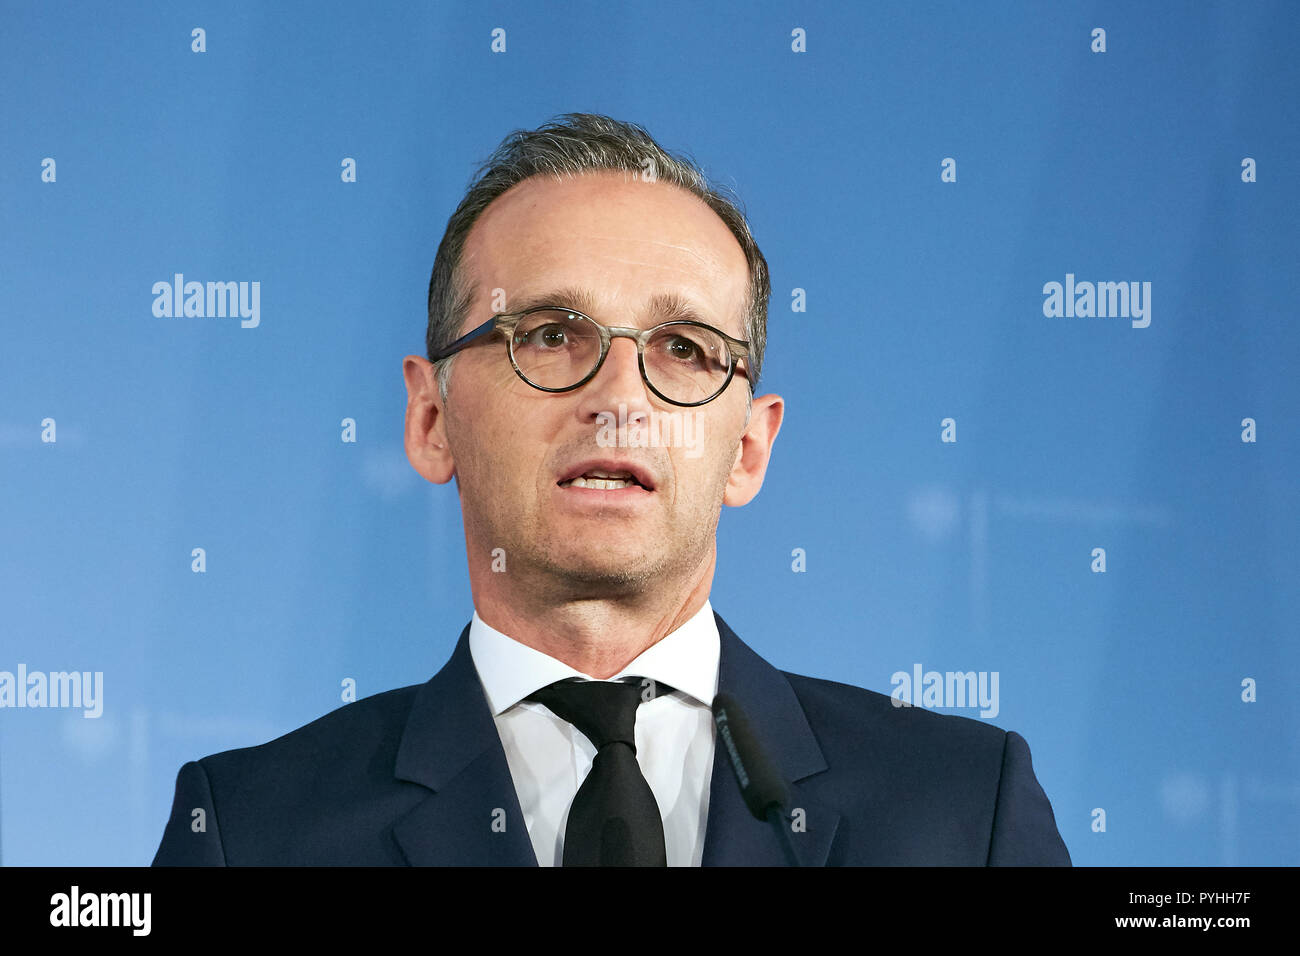 Berlin, Germany - Federal Foreign Minister Heiko Maas. Stock Photo